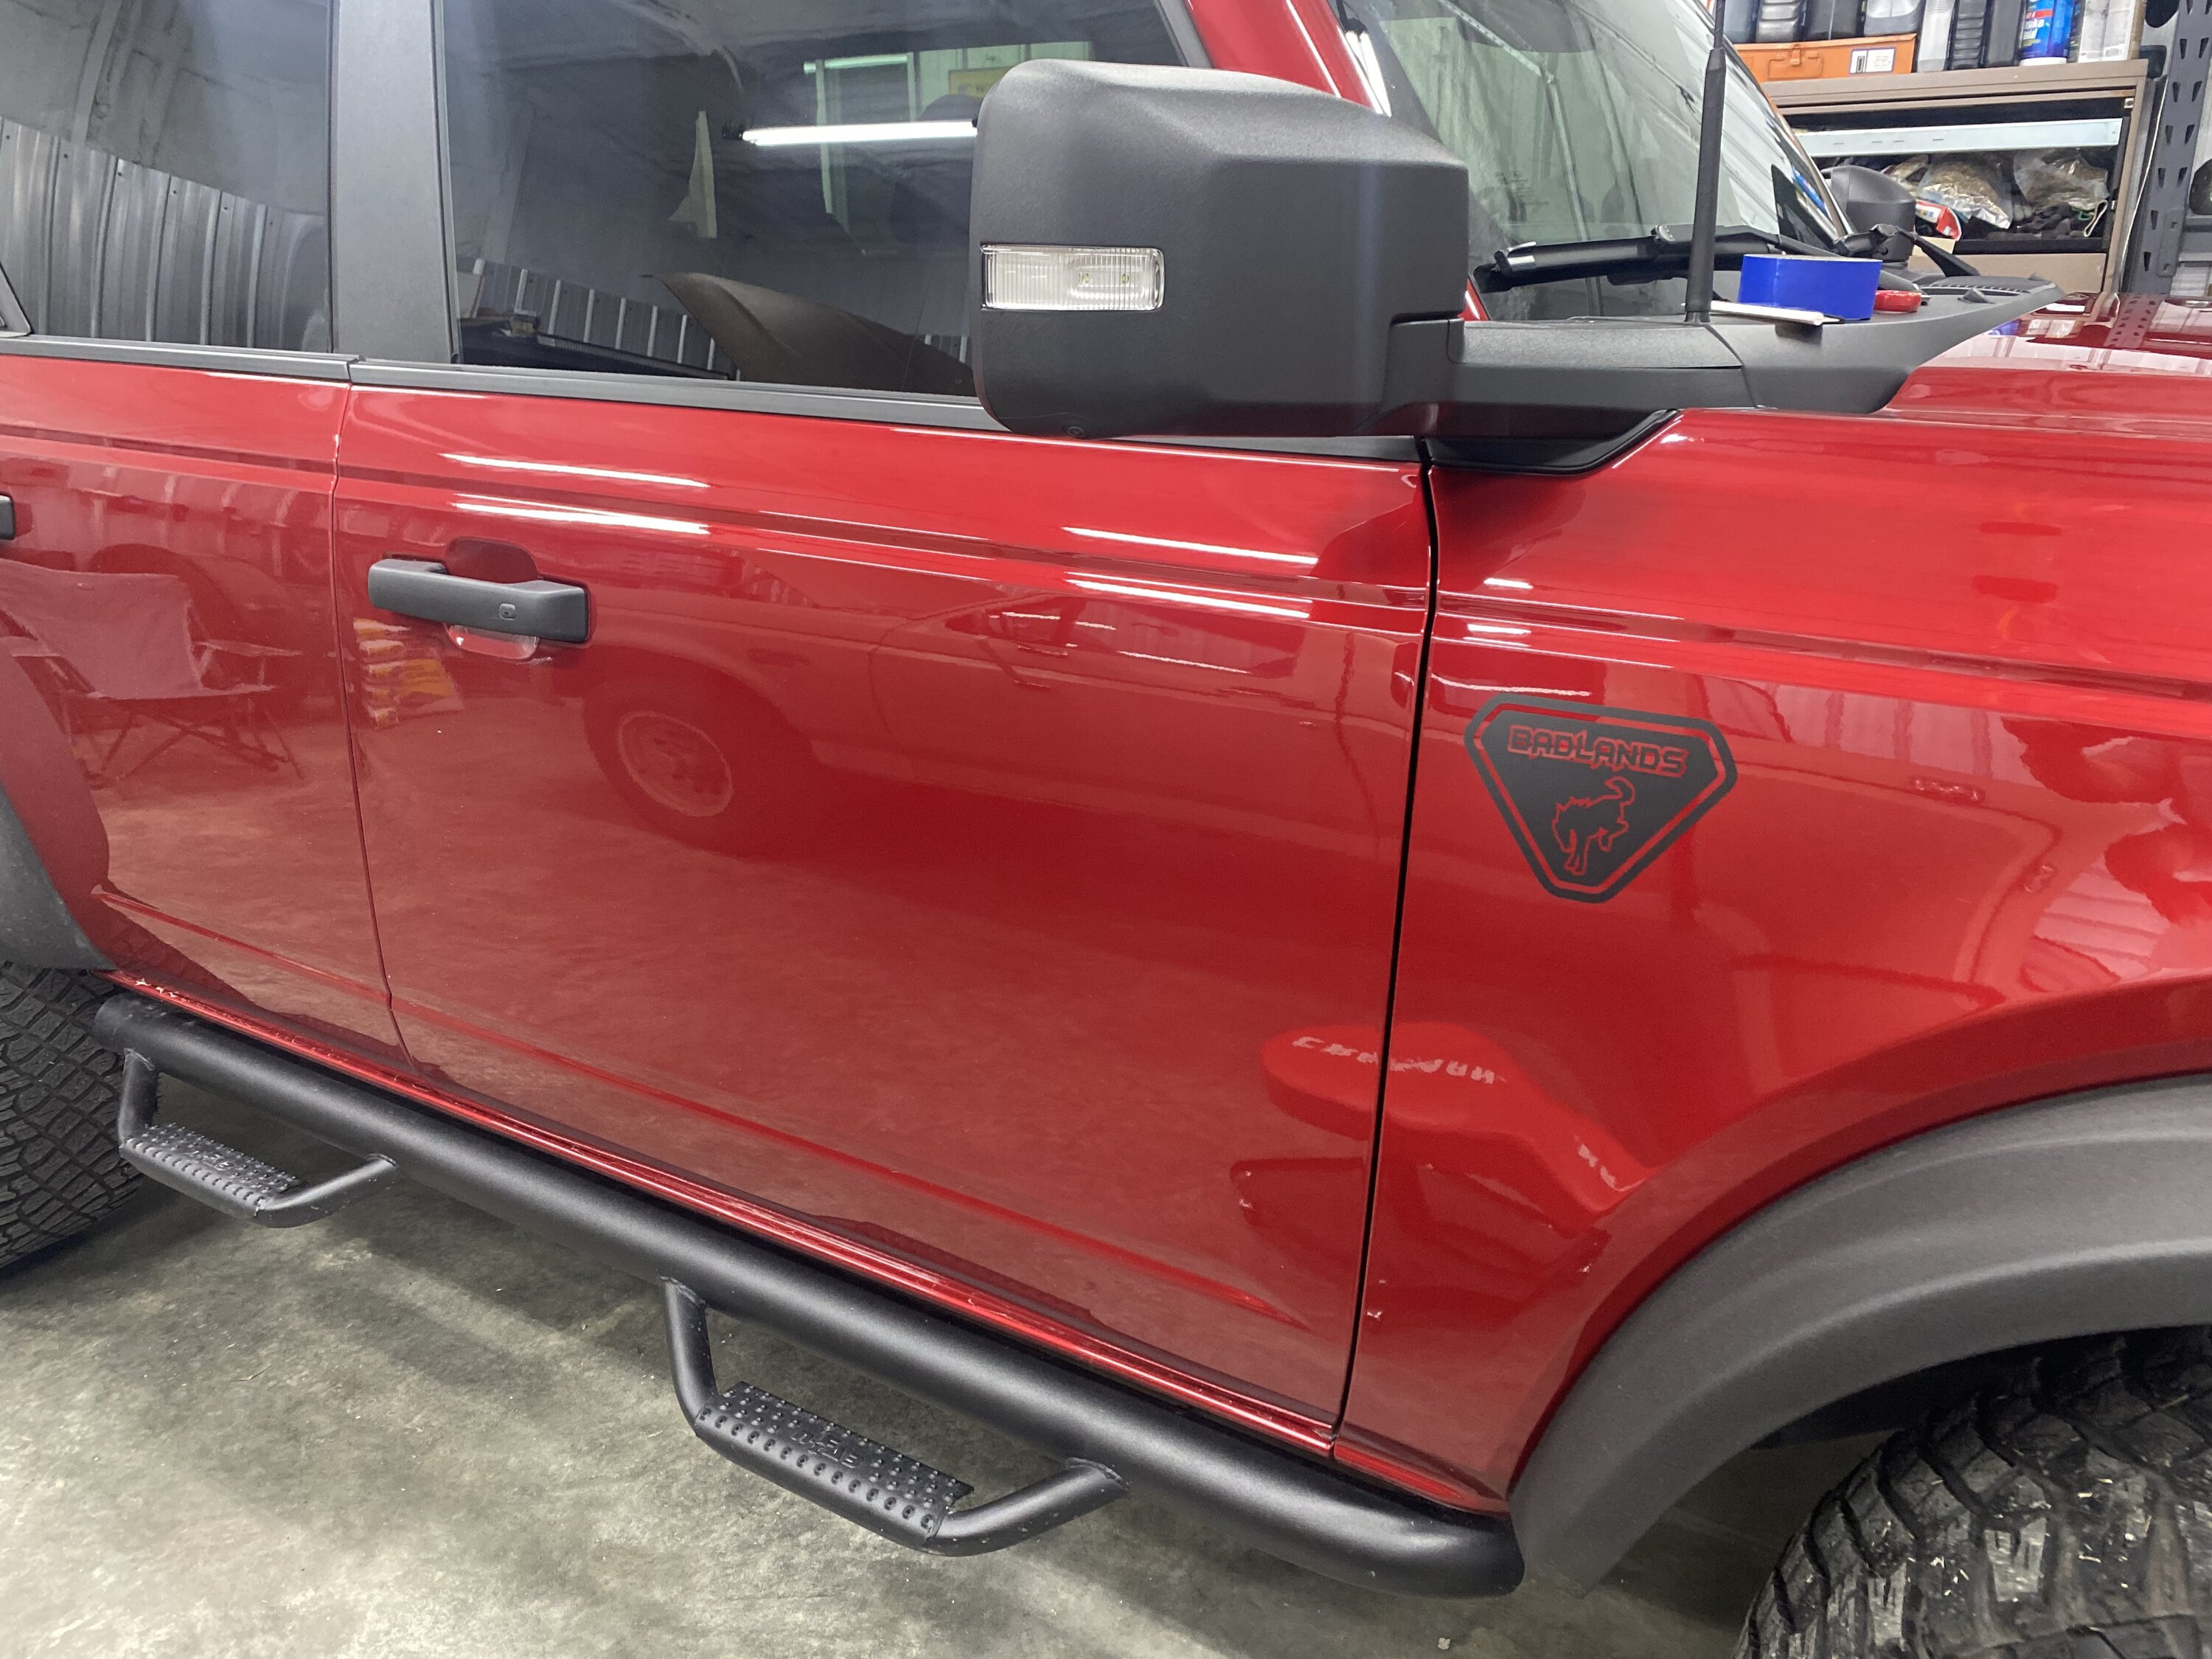 Ford Bronco Put any cool / unique vinyl decals on your Bronco?  Let's see them! 69733096297--C2A86FDD-C1B7-40E0-9E91-62A614FA1DFD